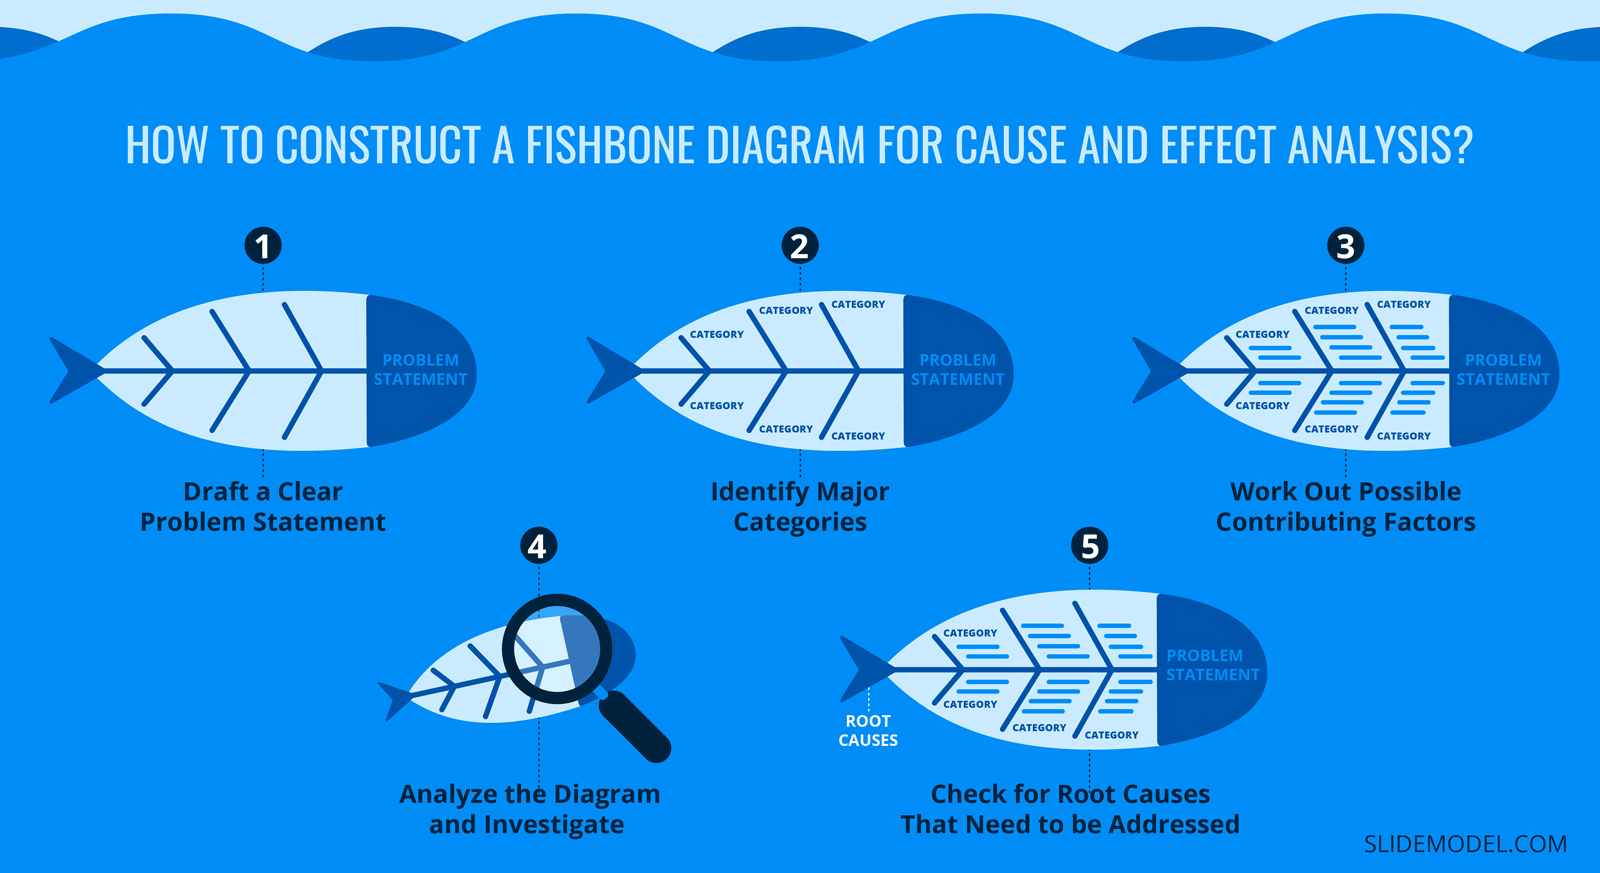 How to Construct a Fishbone Diagram for Cause and Effect Analysis?